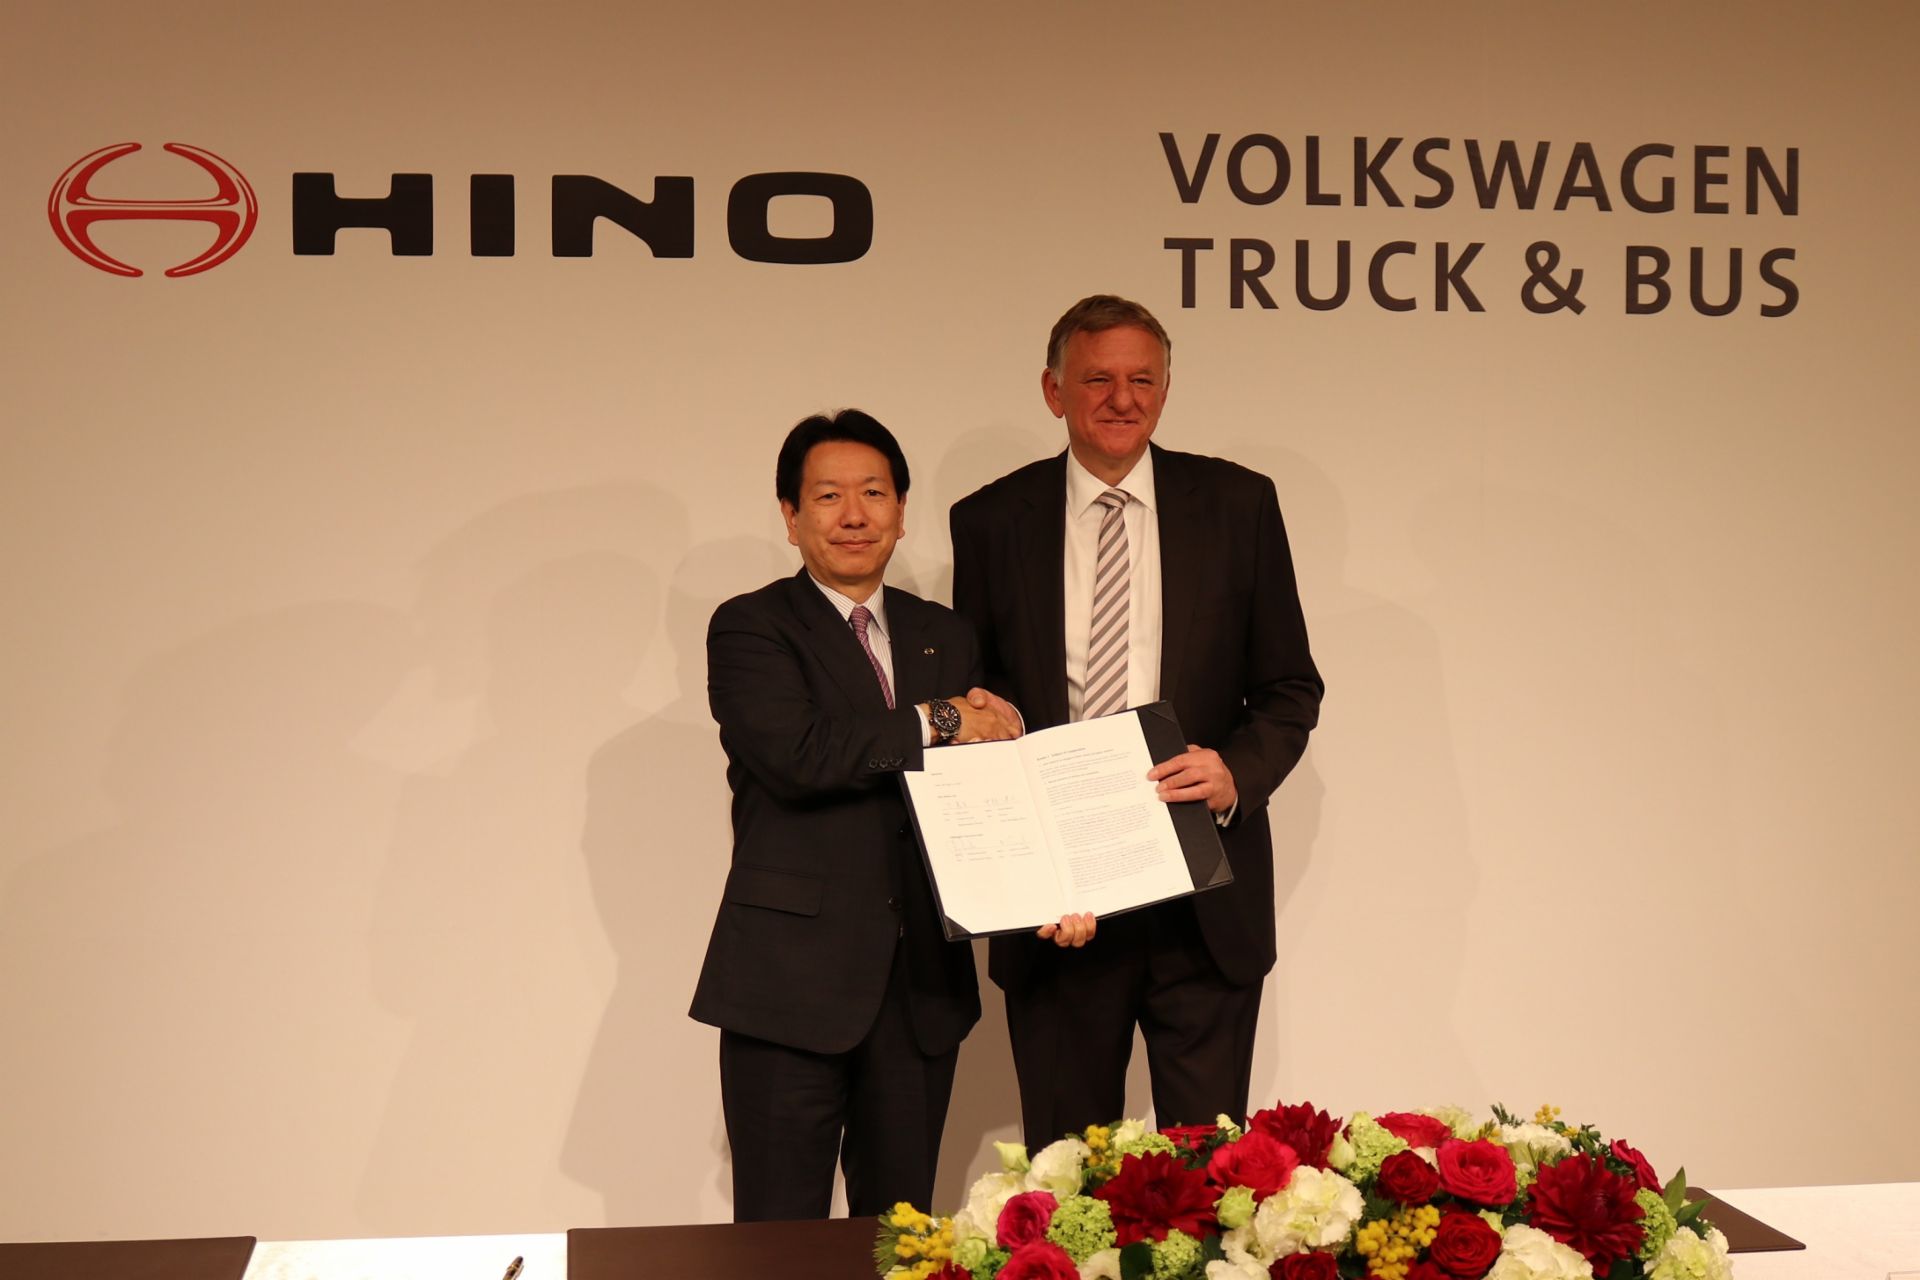 (from left) Yoshio Shimo, President & CEO of Hino Motors, Andreas Renschler, Member of the Board of Management of Volkswagen AG and CEO of TRATON